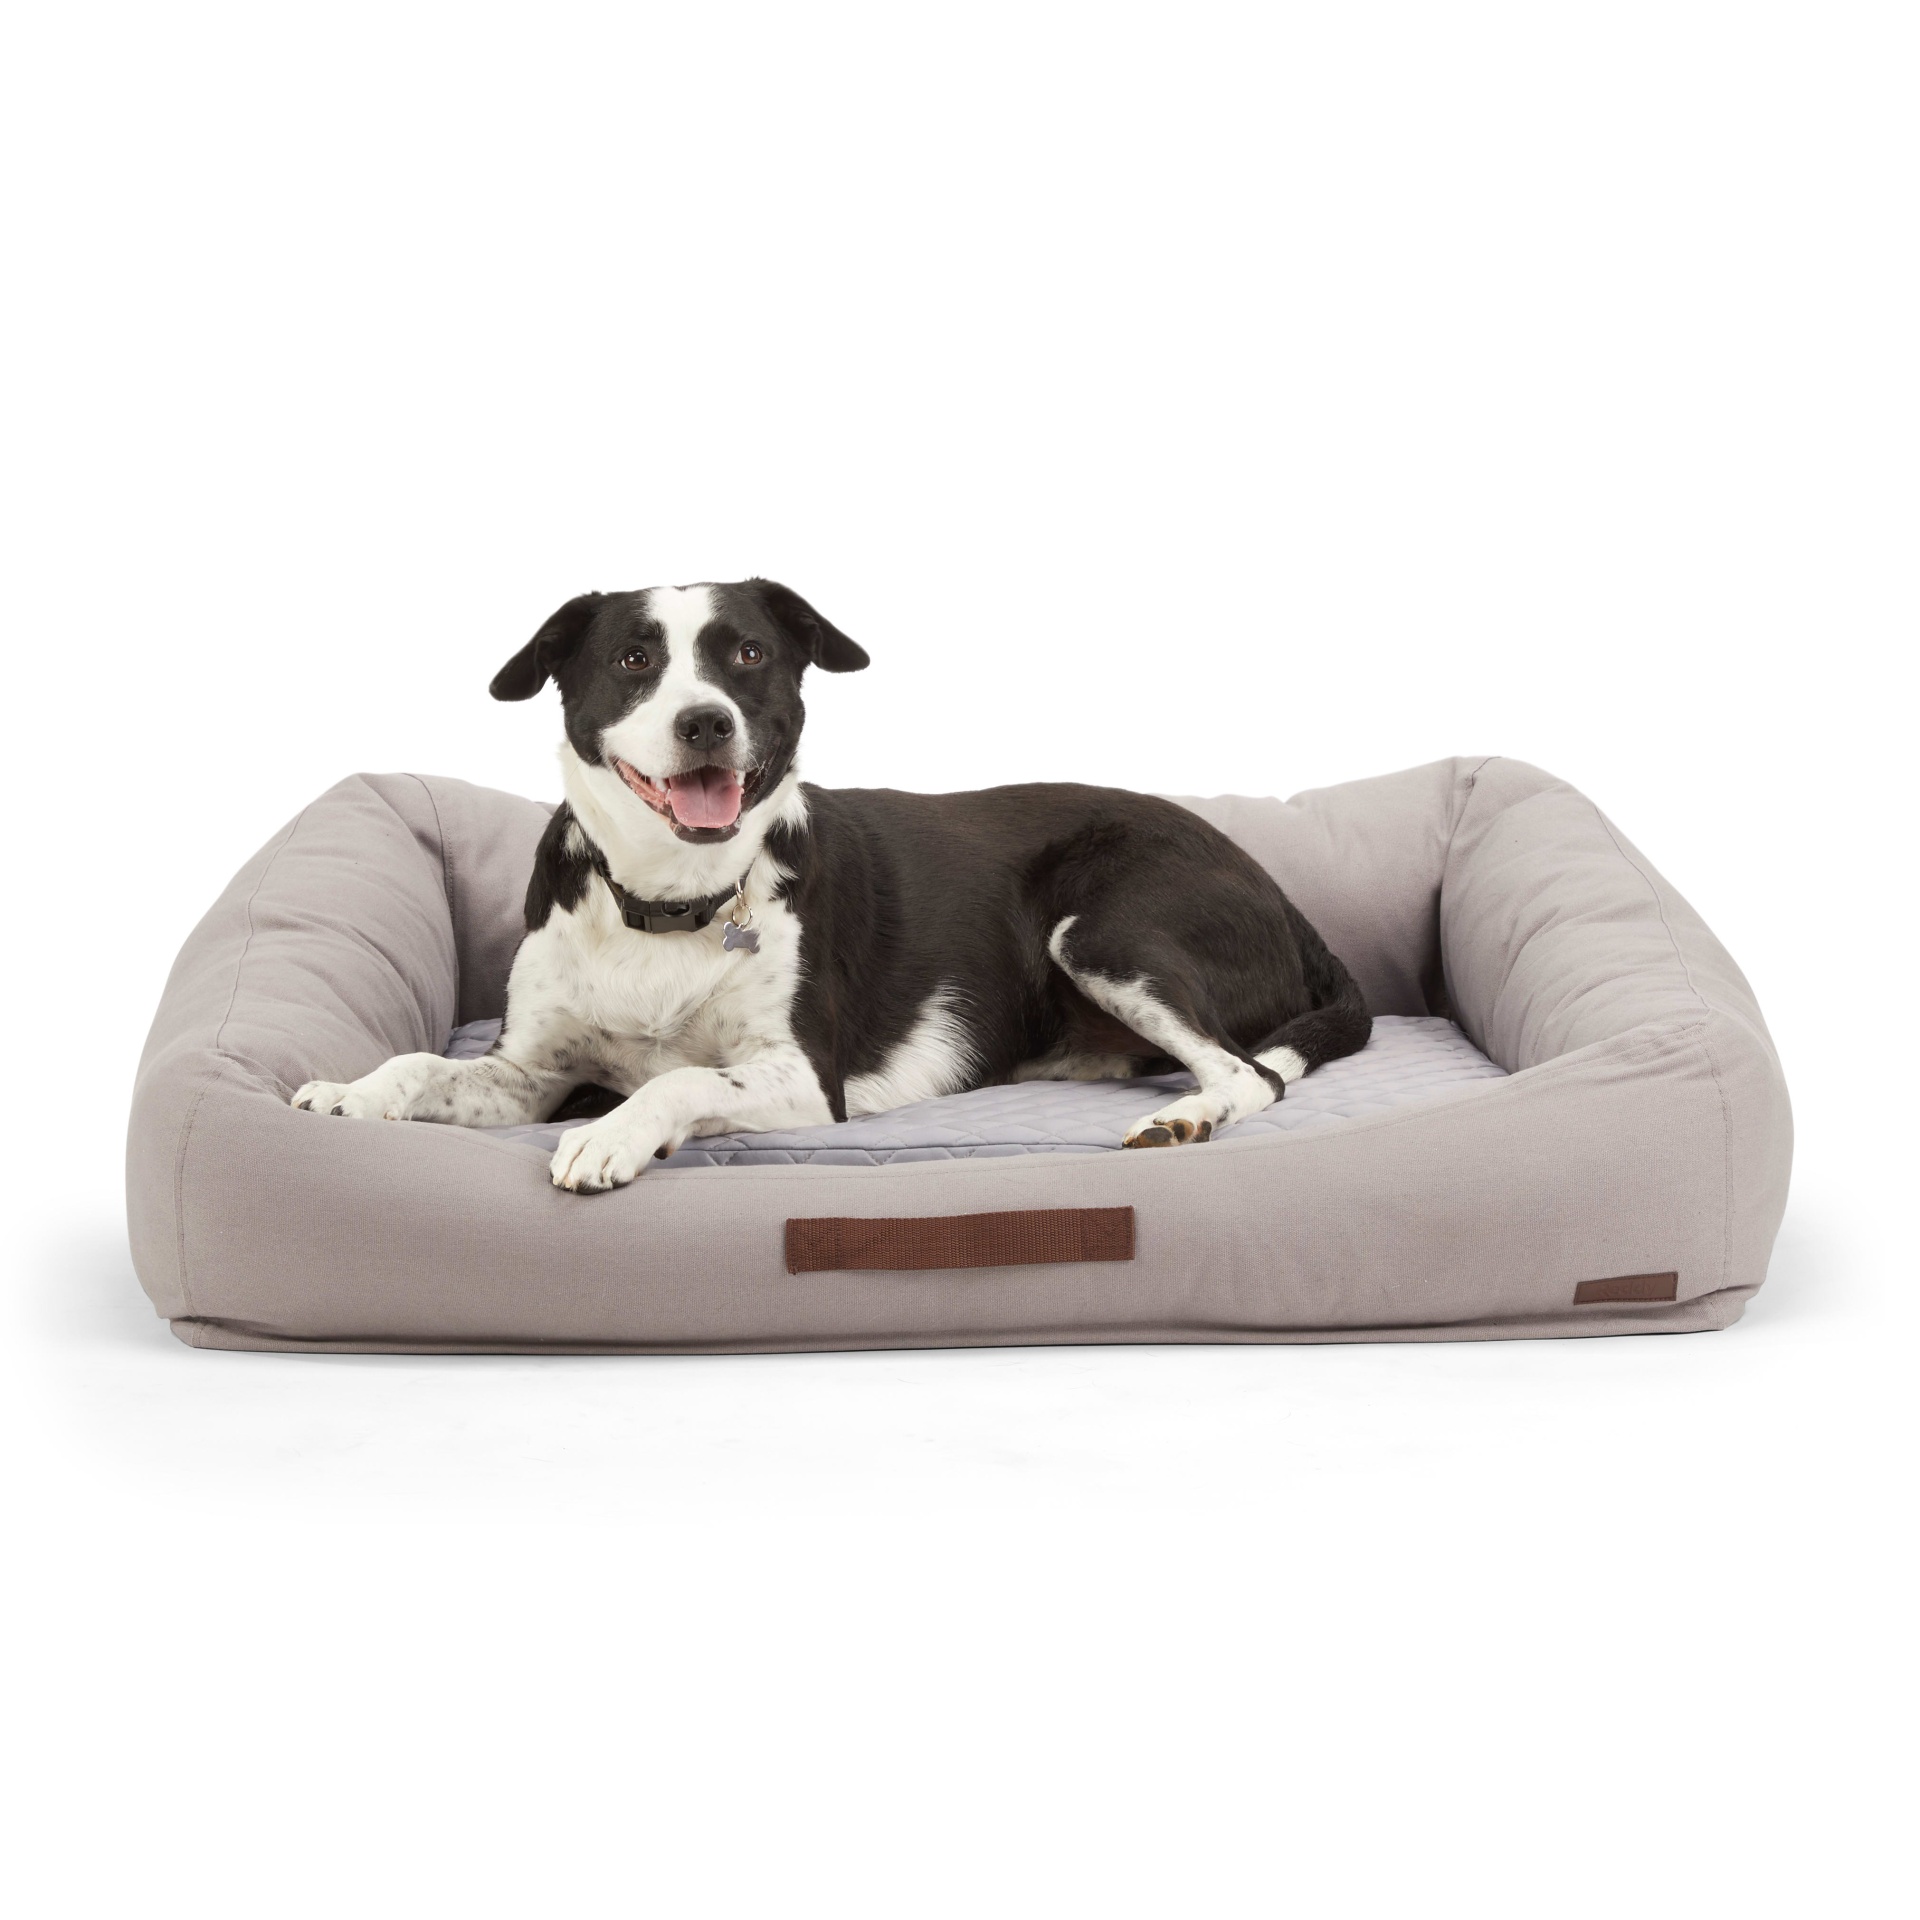 Two dogs on Bedsure orthopedic dog bed